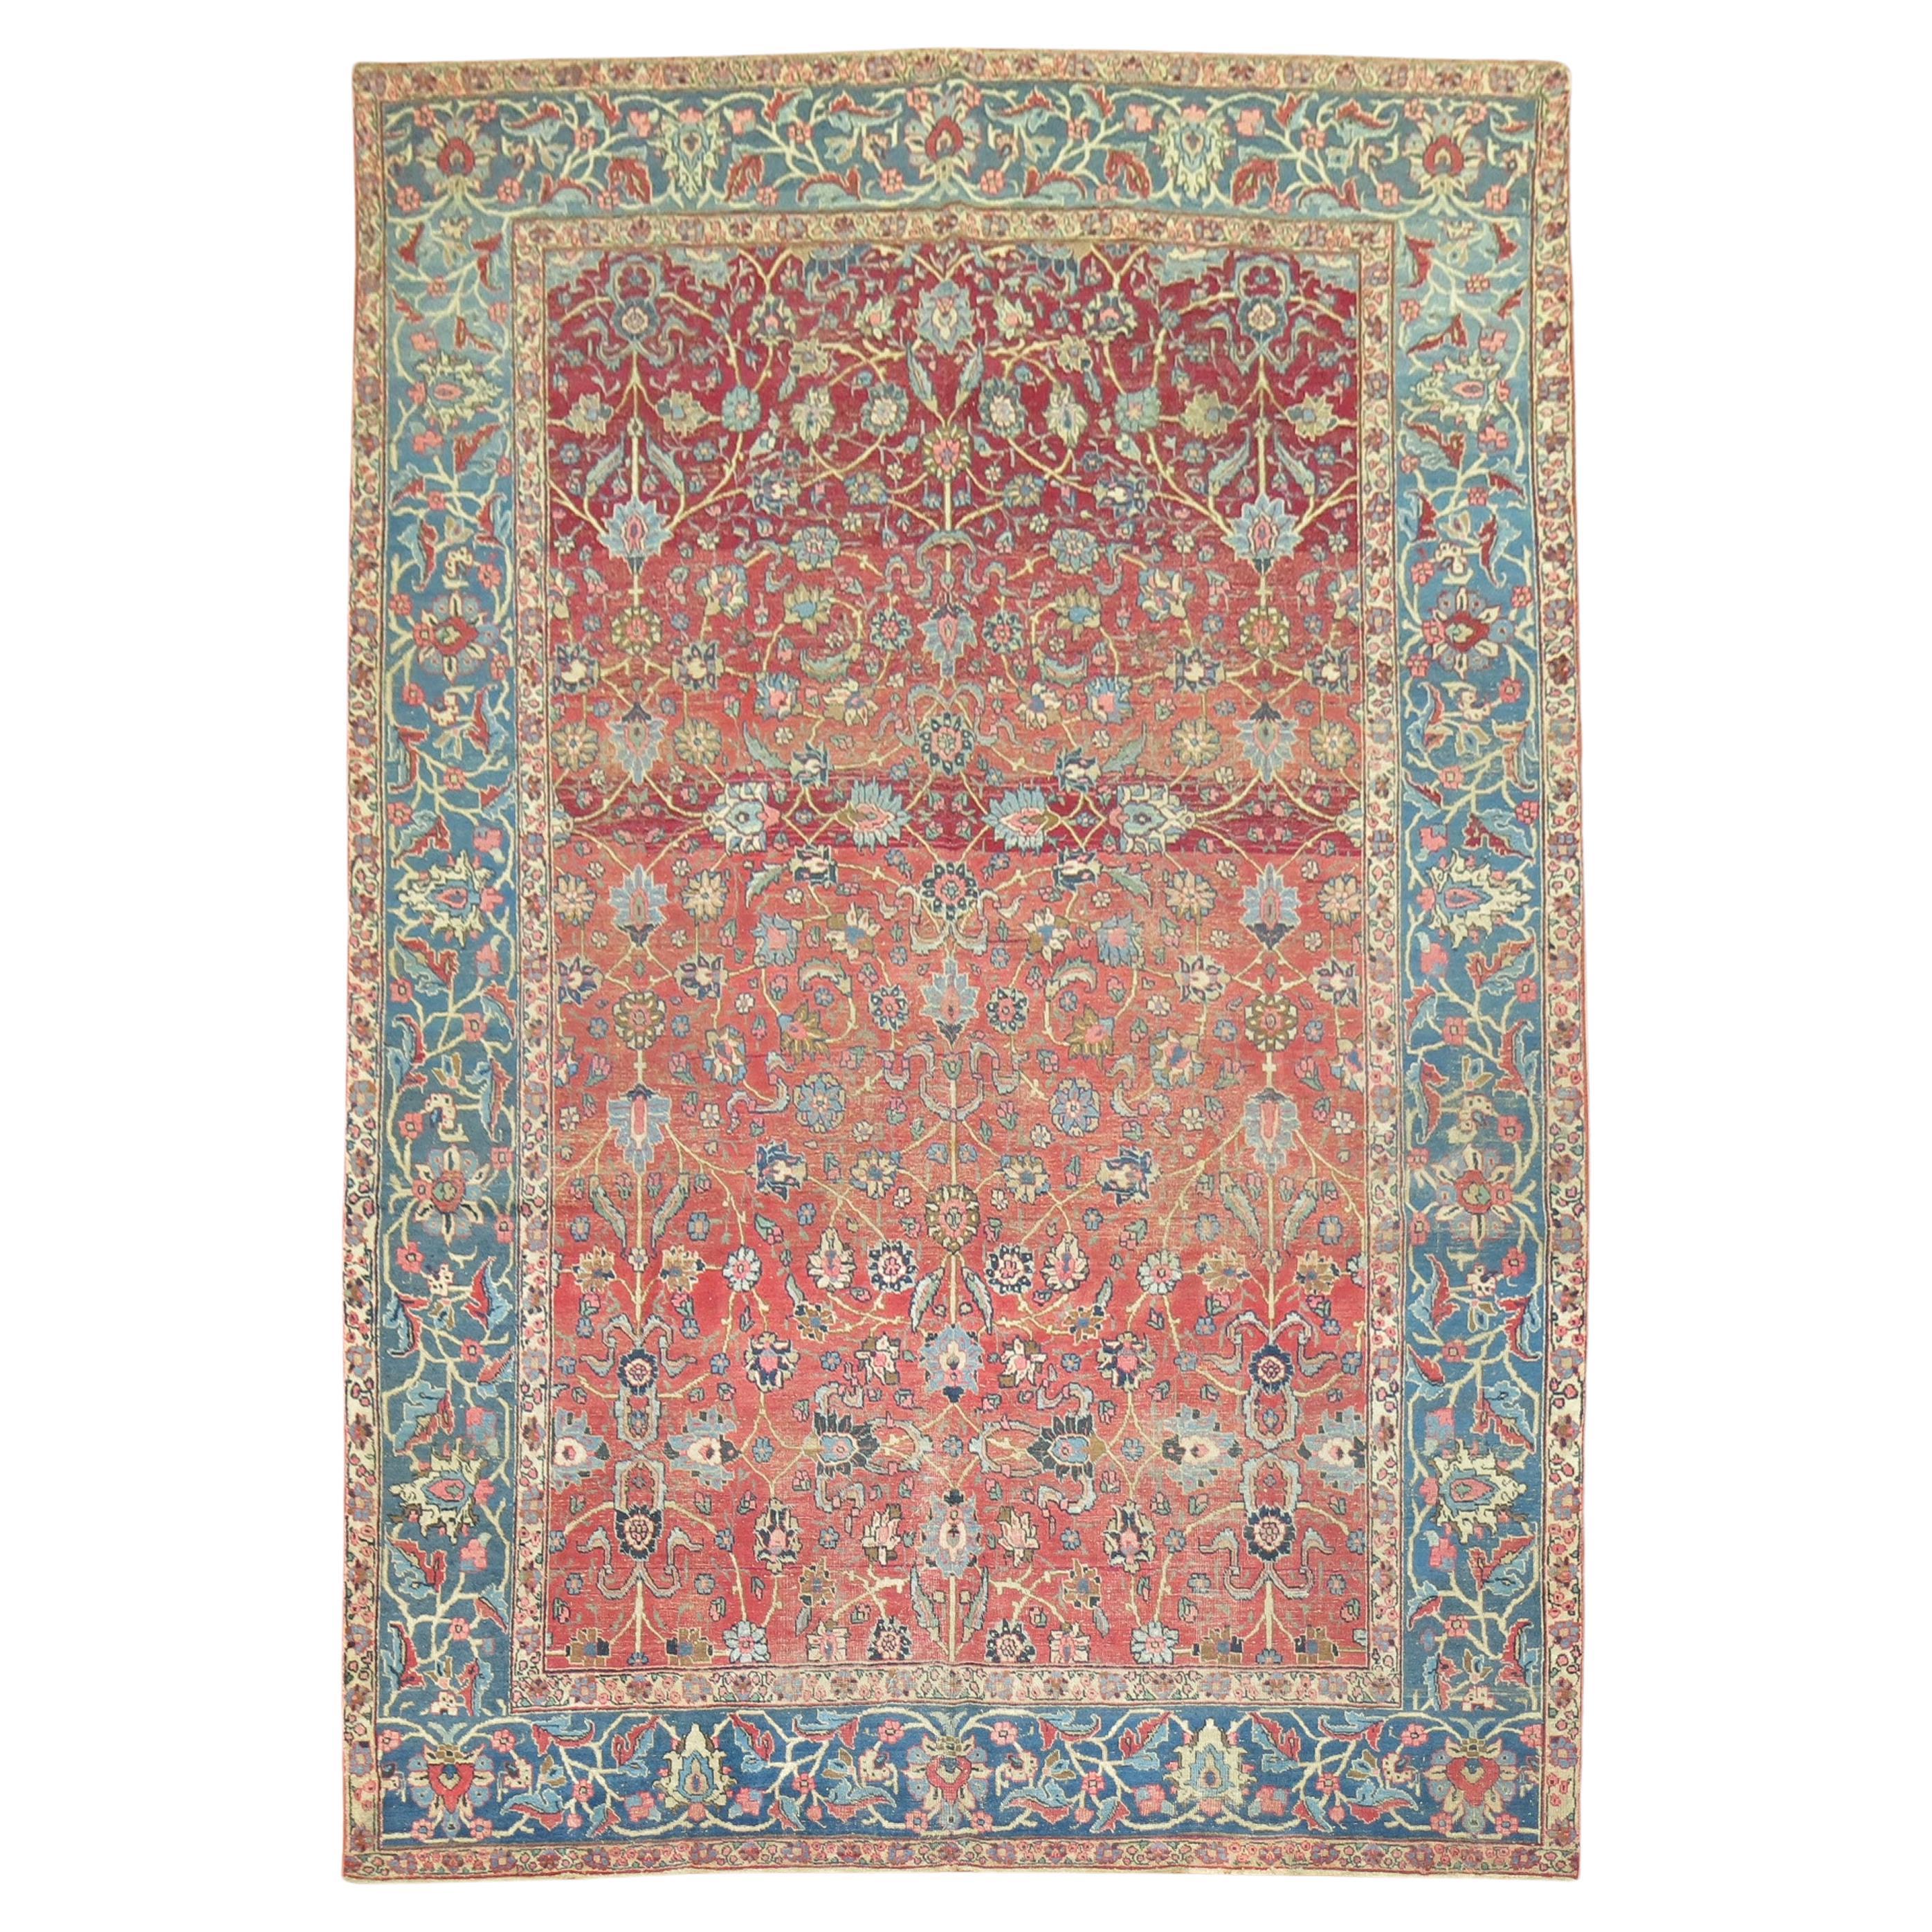 Early 20th Century Room Size Antique Persian Tabriz Rug For Sale